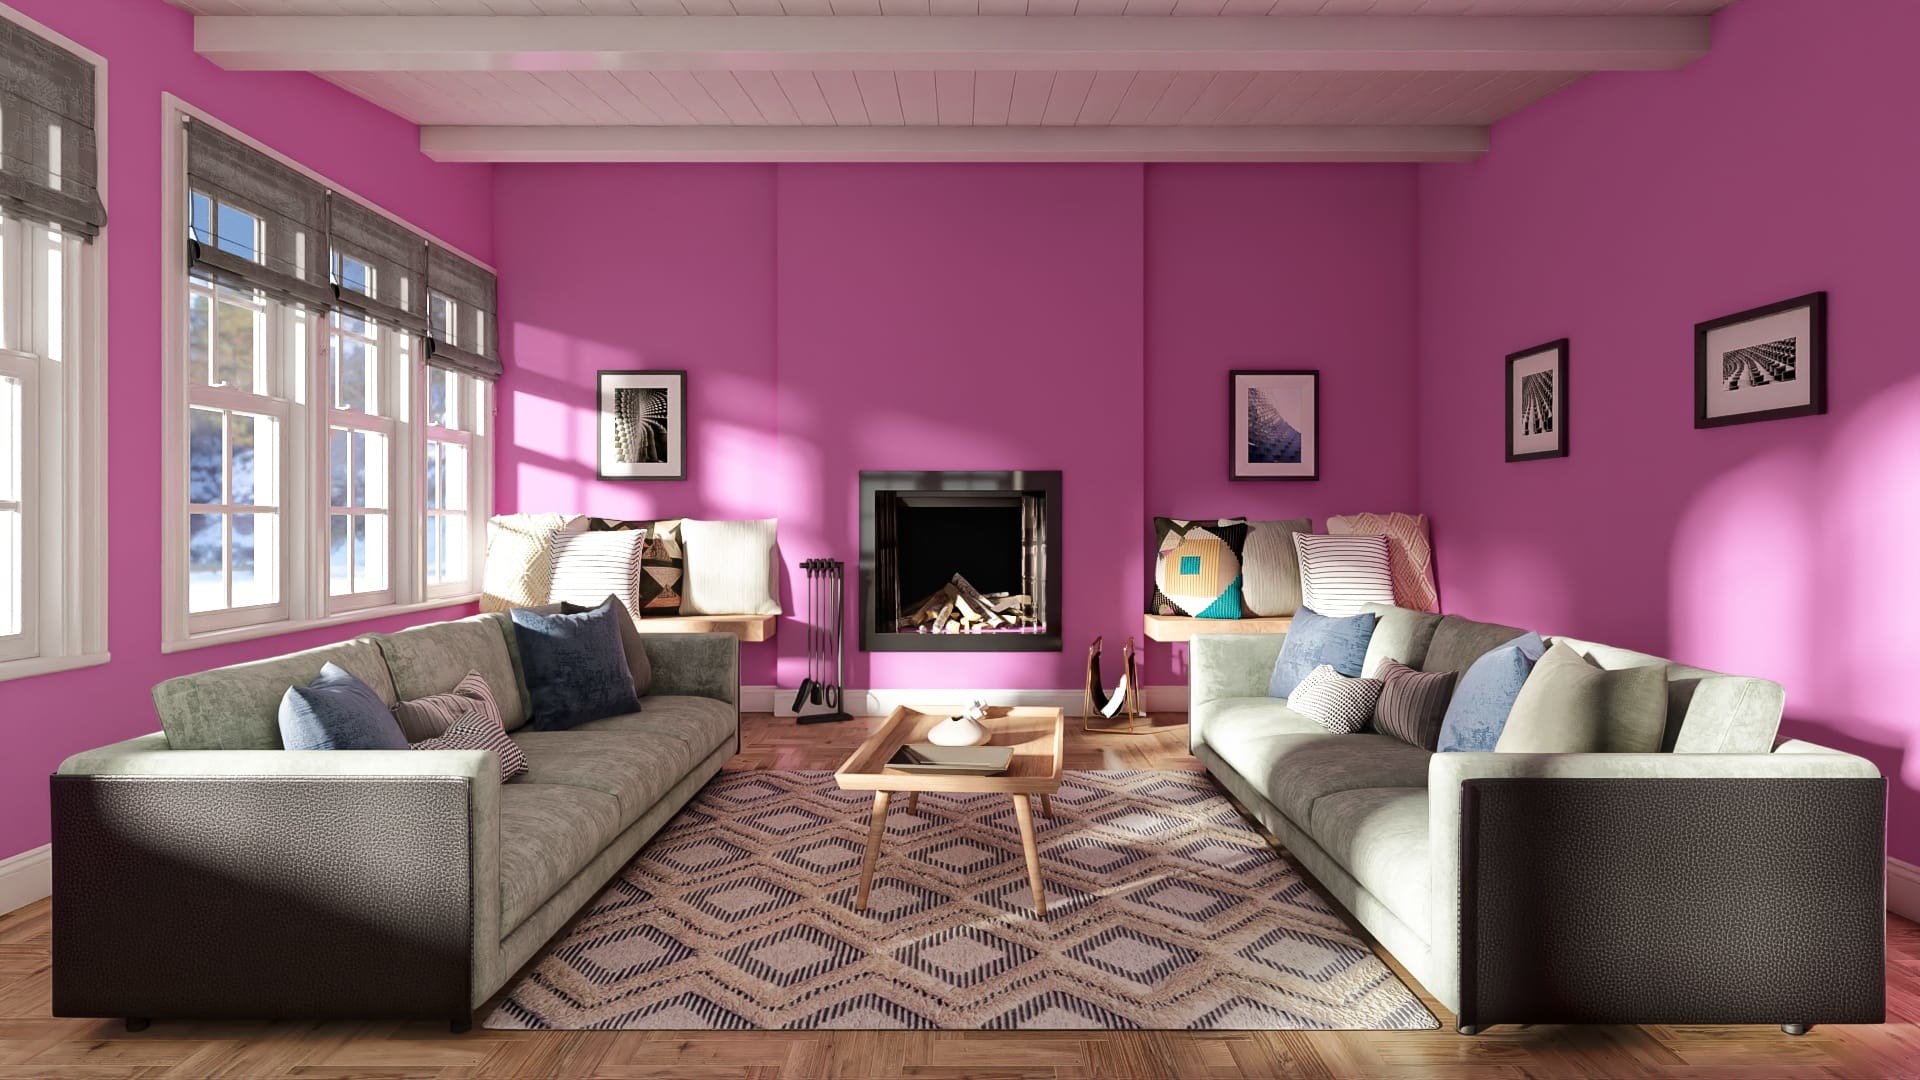 the Cosmic Pink paint in a living room